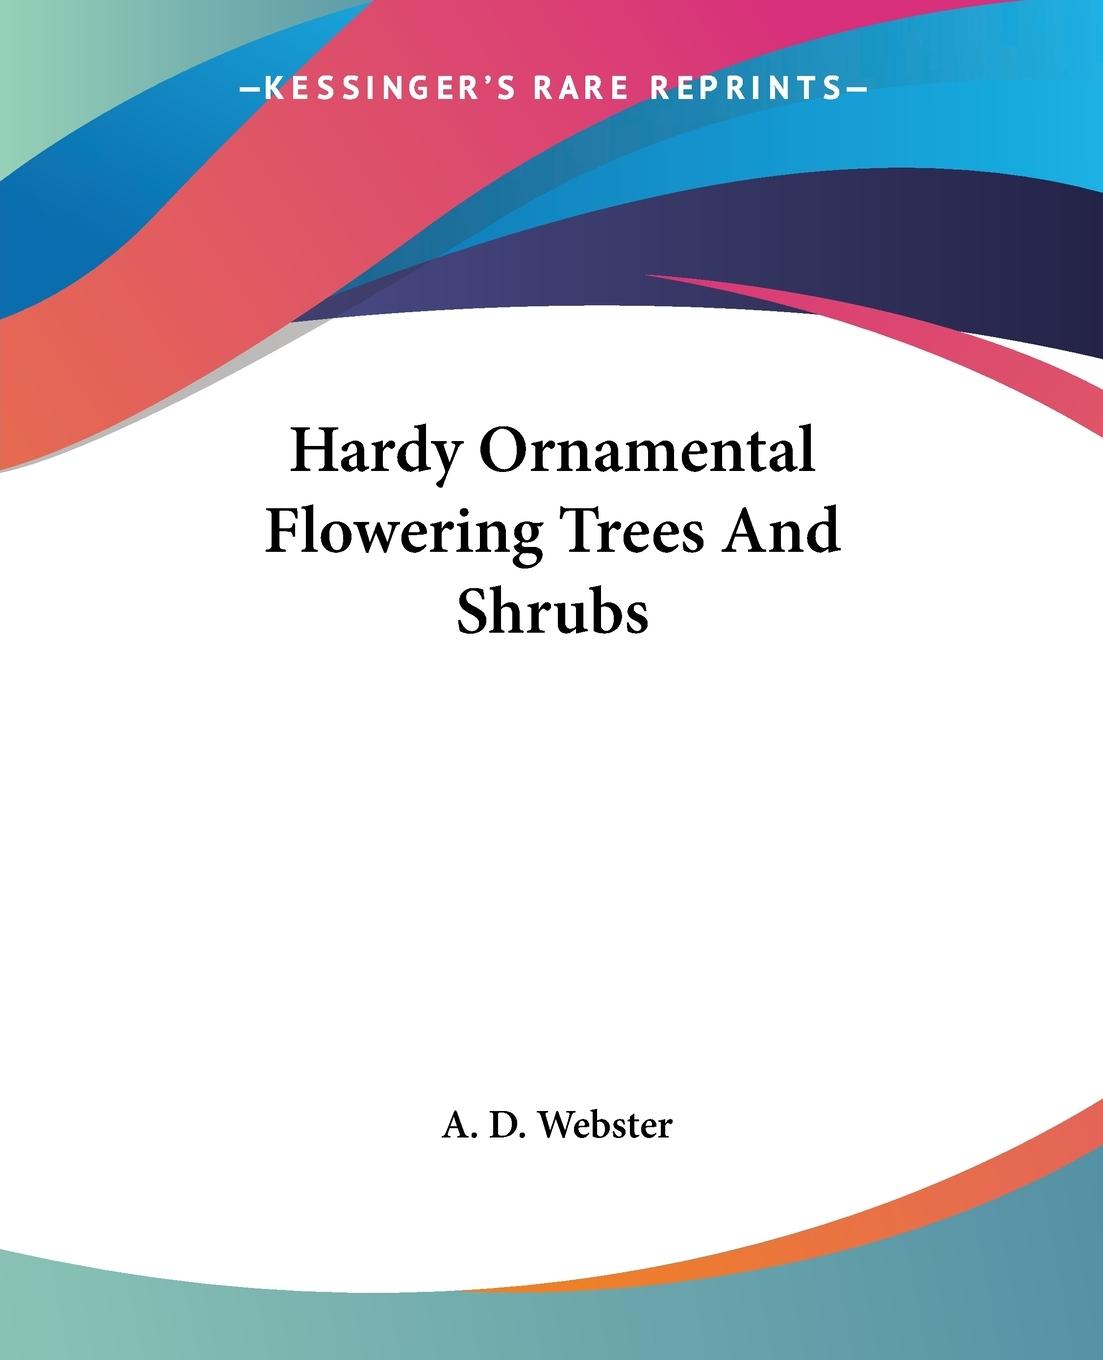 Hardy Ornamental Flowering Trees And Shrubs - Webster, A. D.